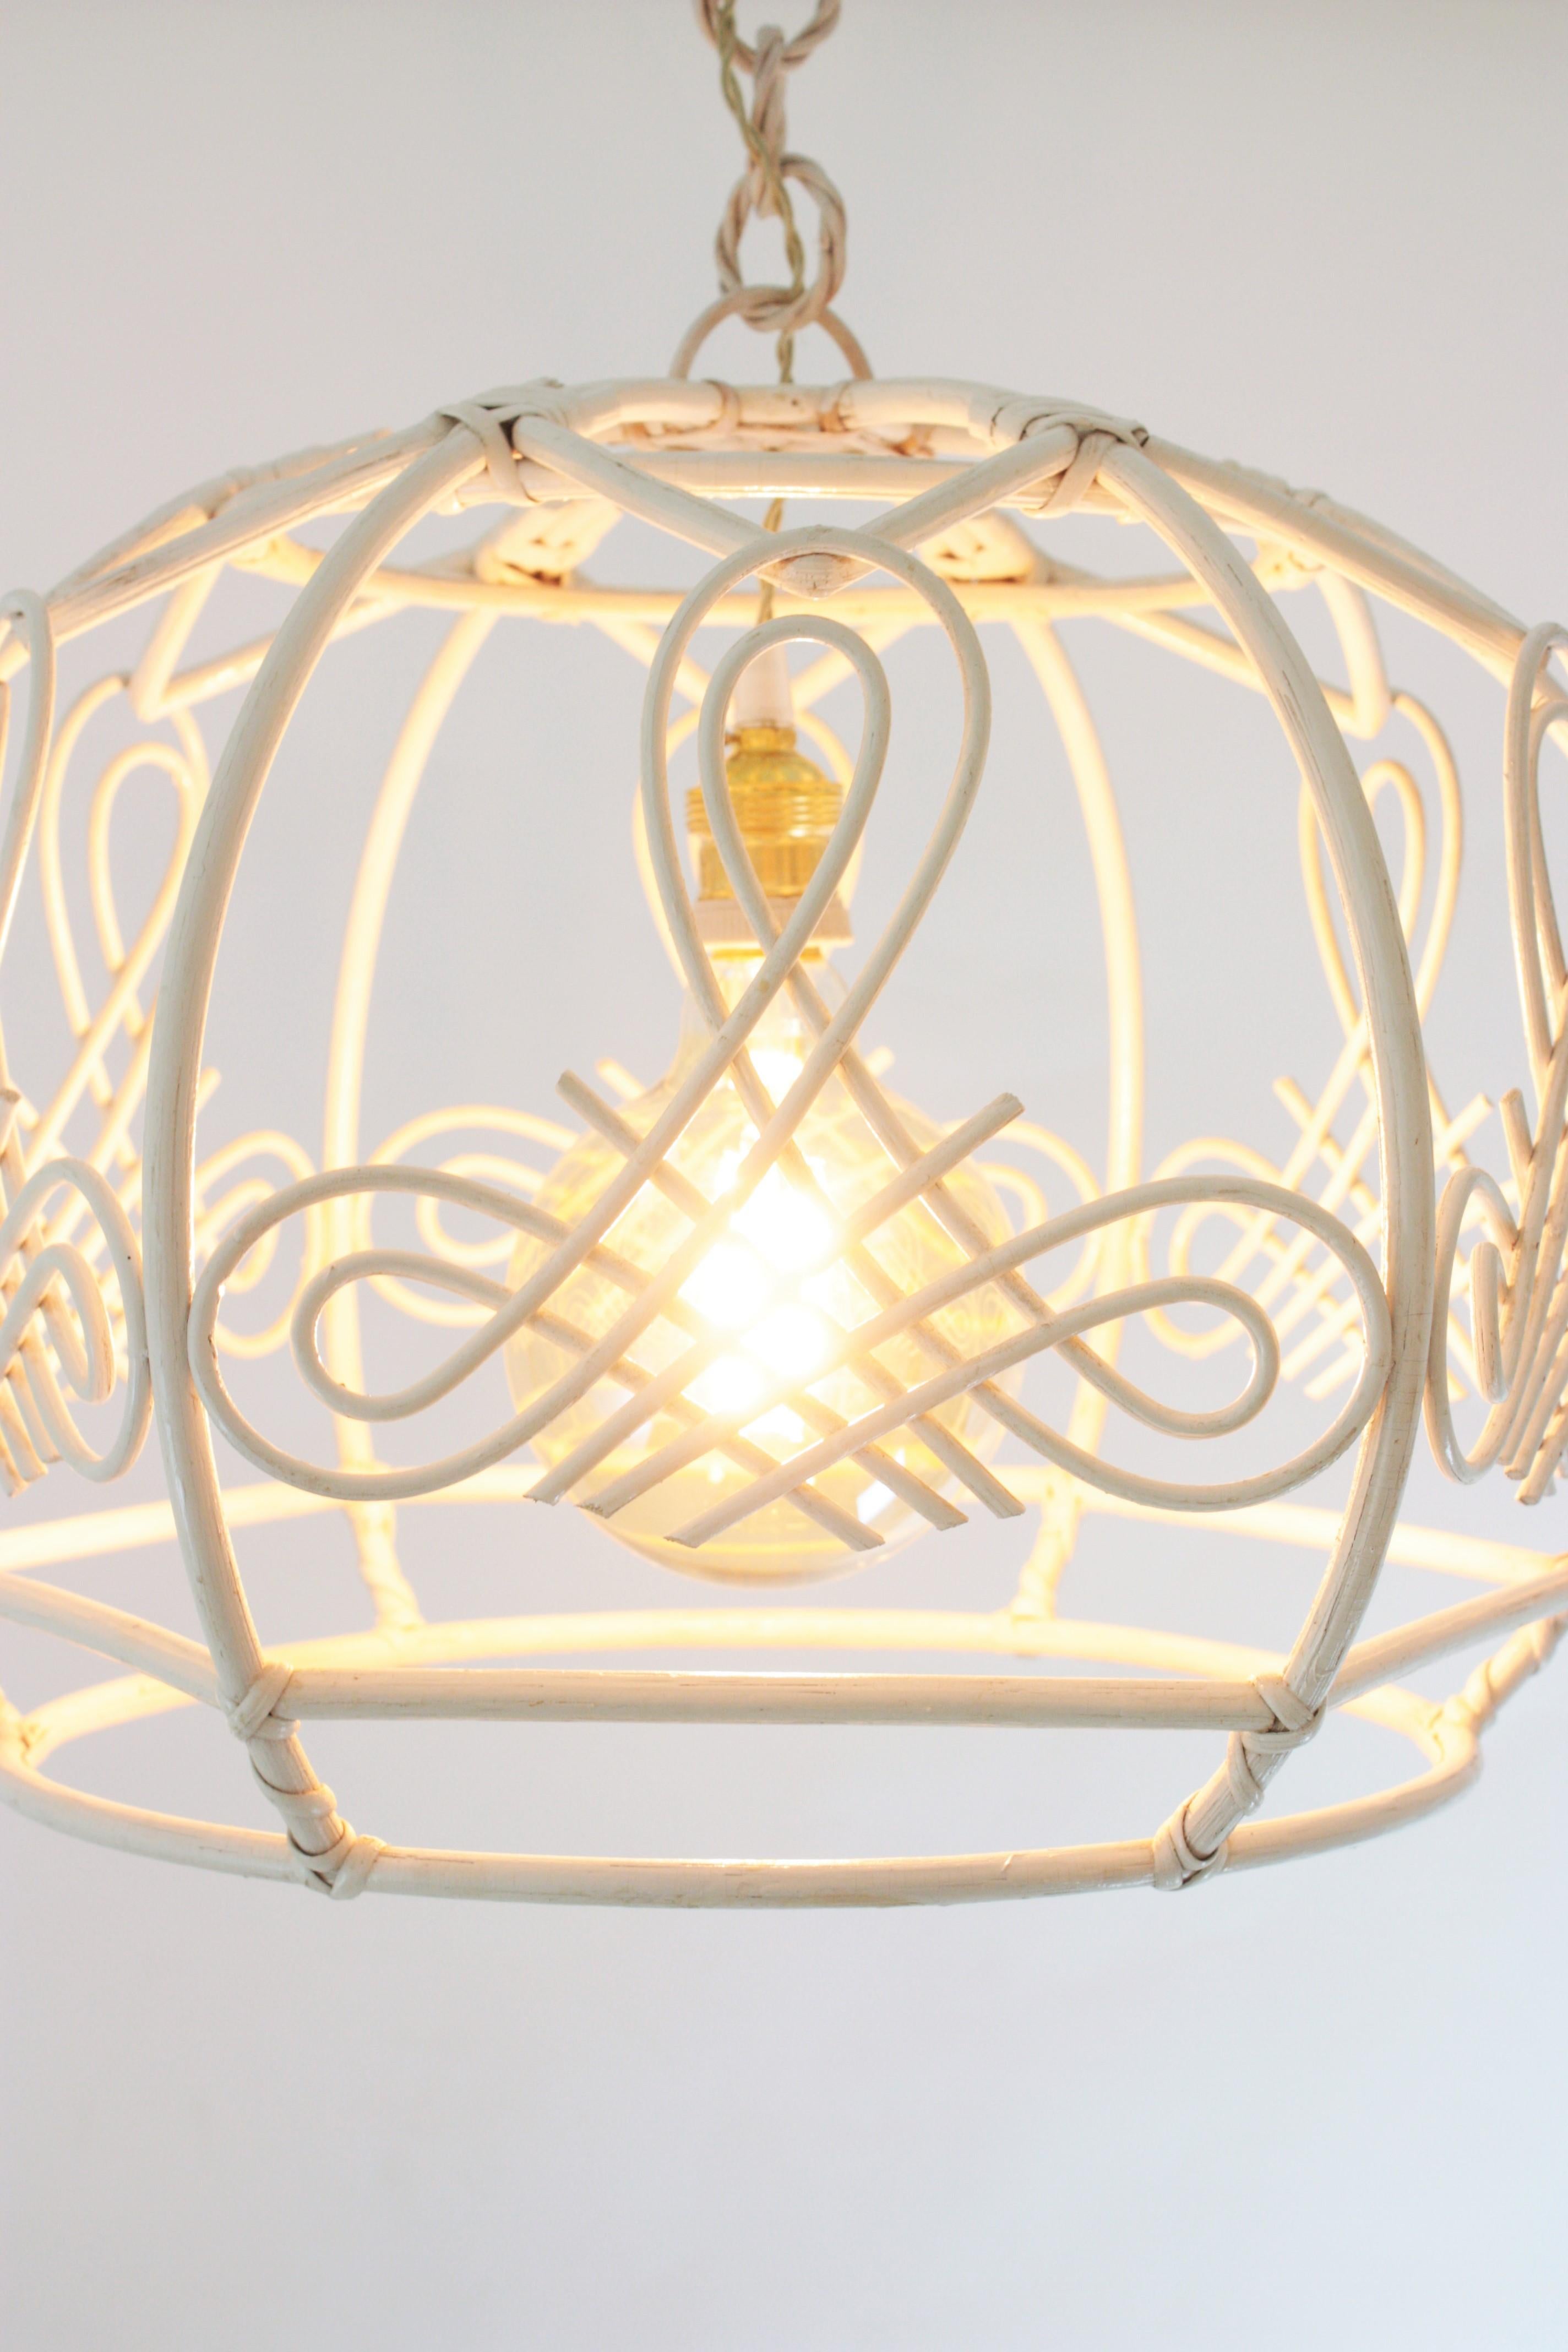 French Rattan Bell Pendant Lamp / Lantern in White Patina, 1960s For Sale 7